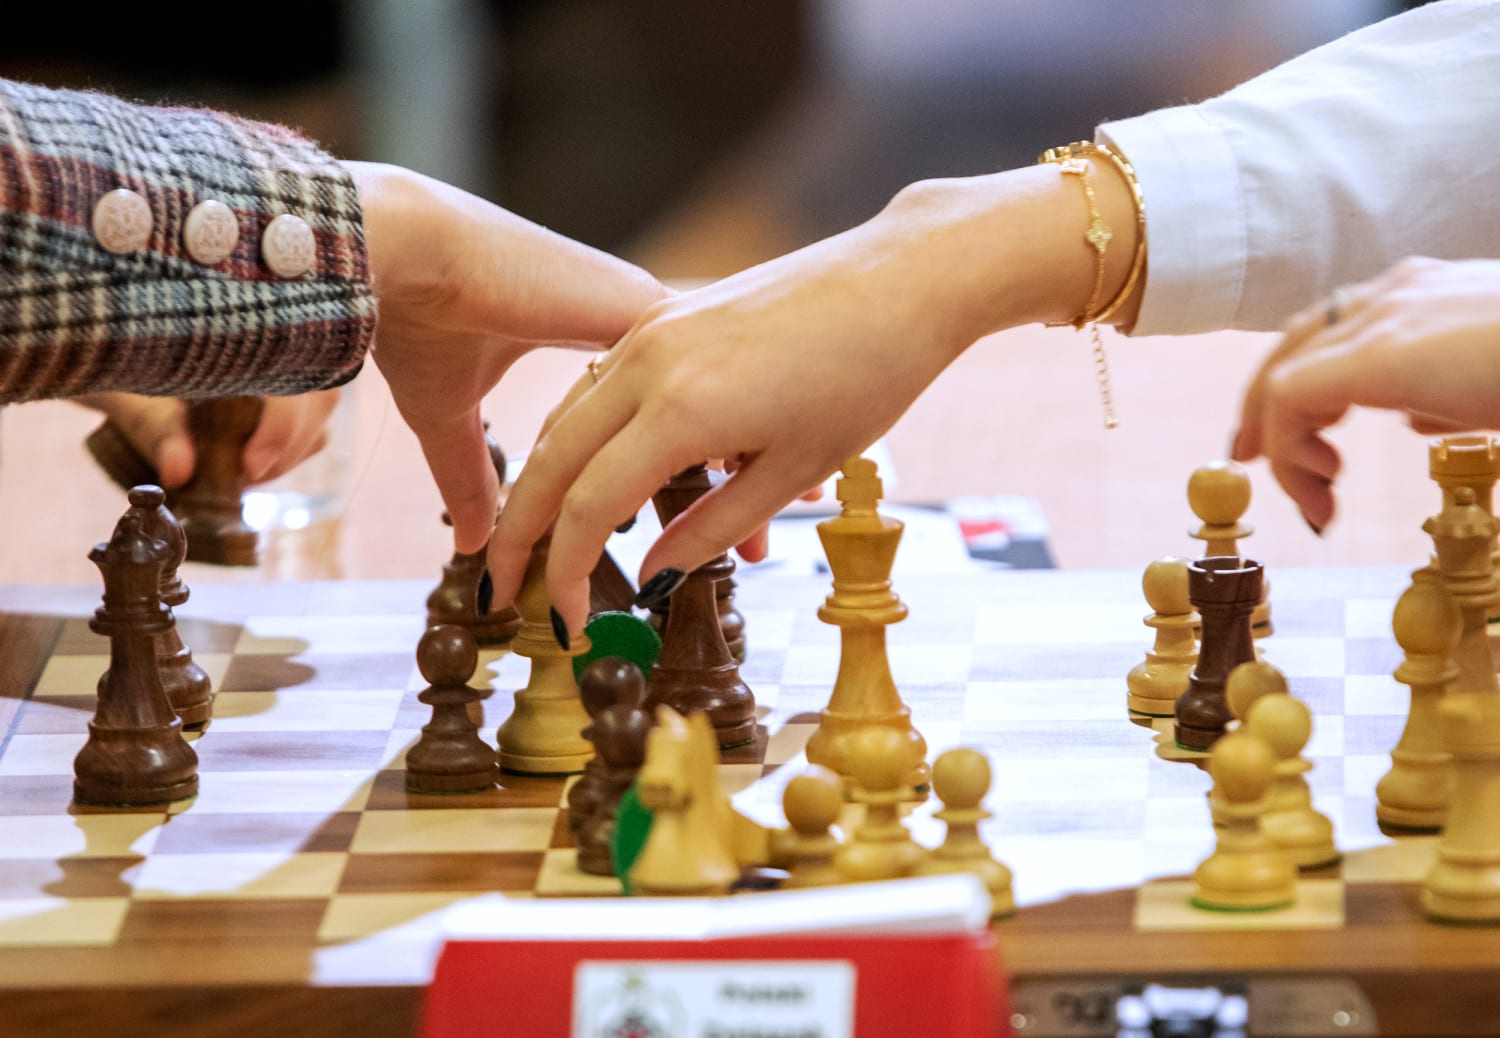 Transgender women temporarily banned from female chess events as FIDE  undertakes 'thorough analysis', News